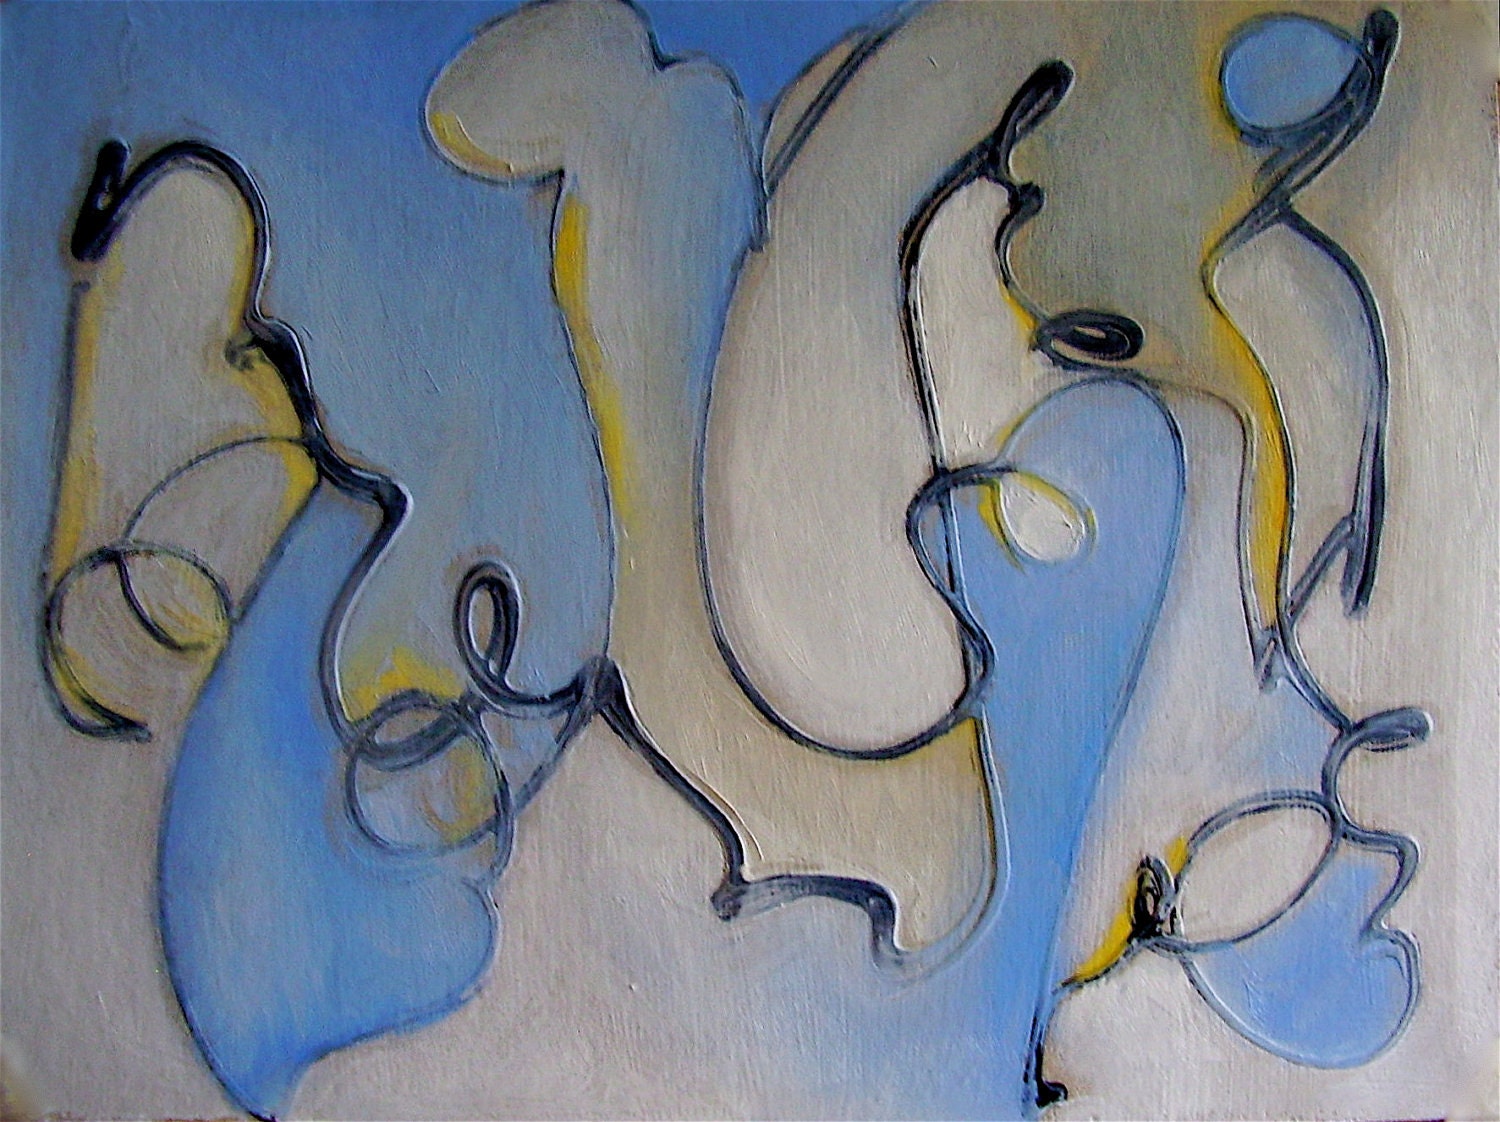 Painting, winter abstract, small, pale blue white and yellow, gestural curls, squiggles, 7.5 x 10 inches